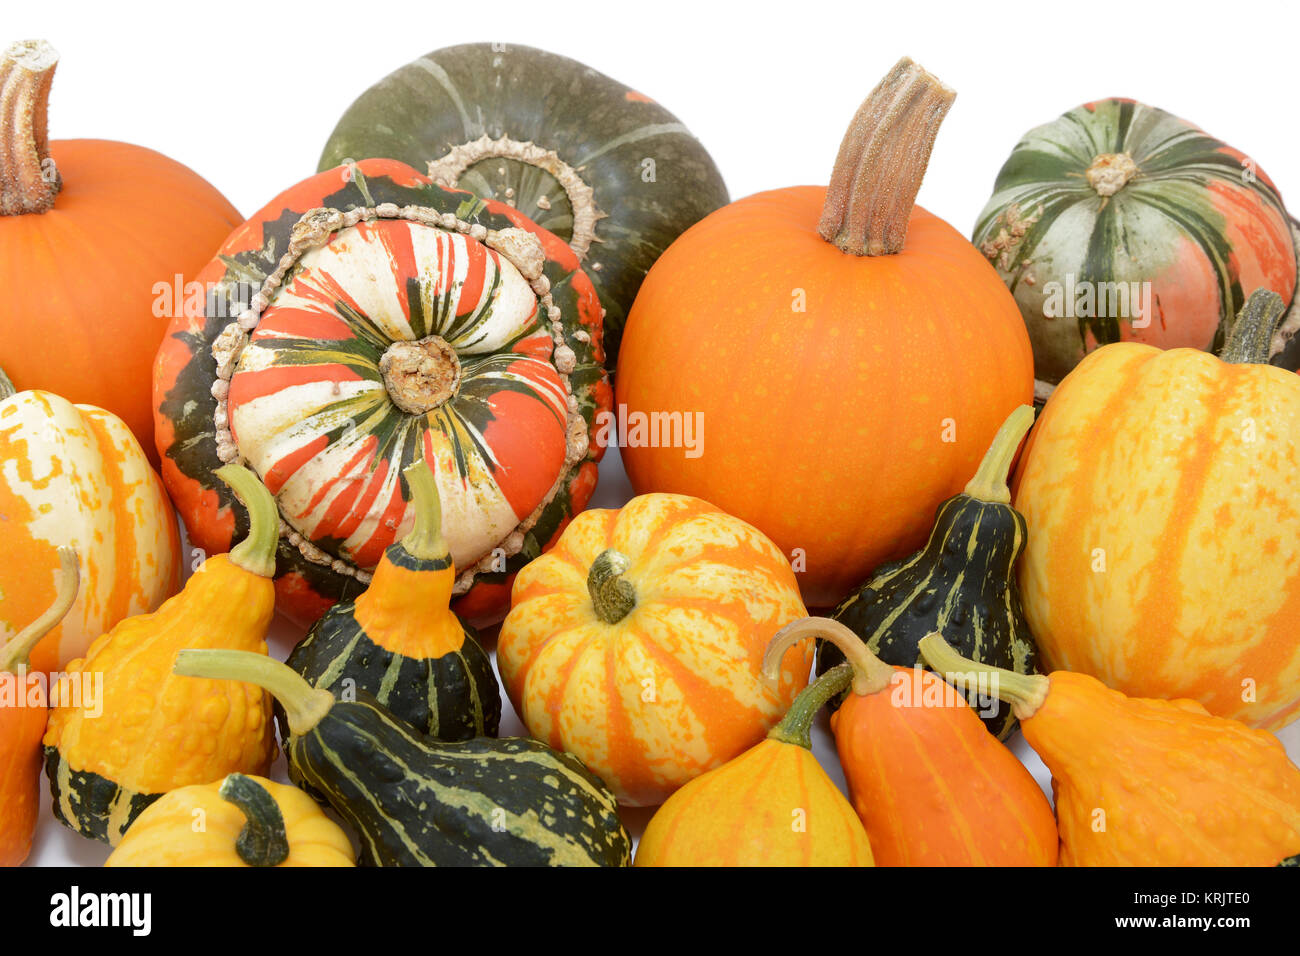 Pile of pumpkins and squashes with ornamental gourds Stock Photo